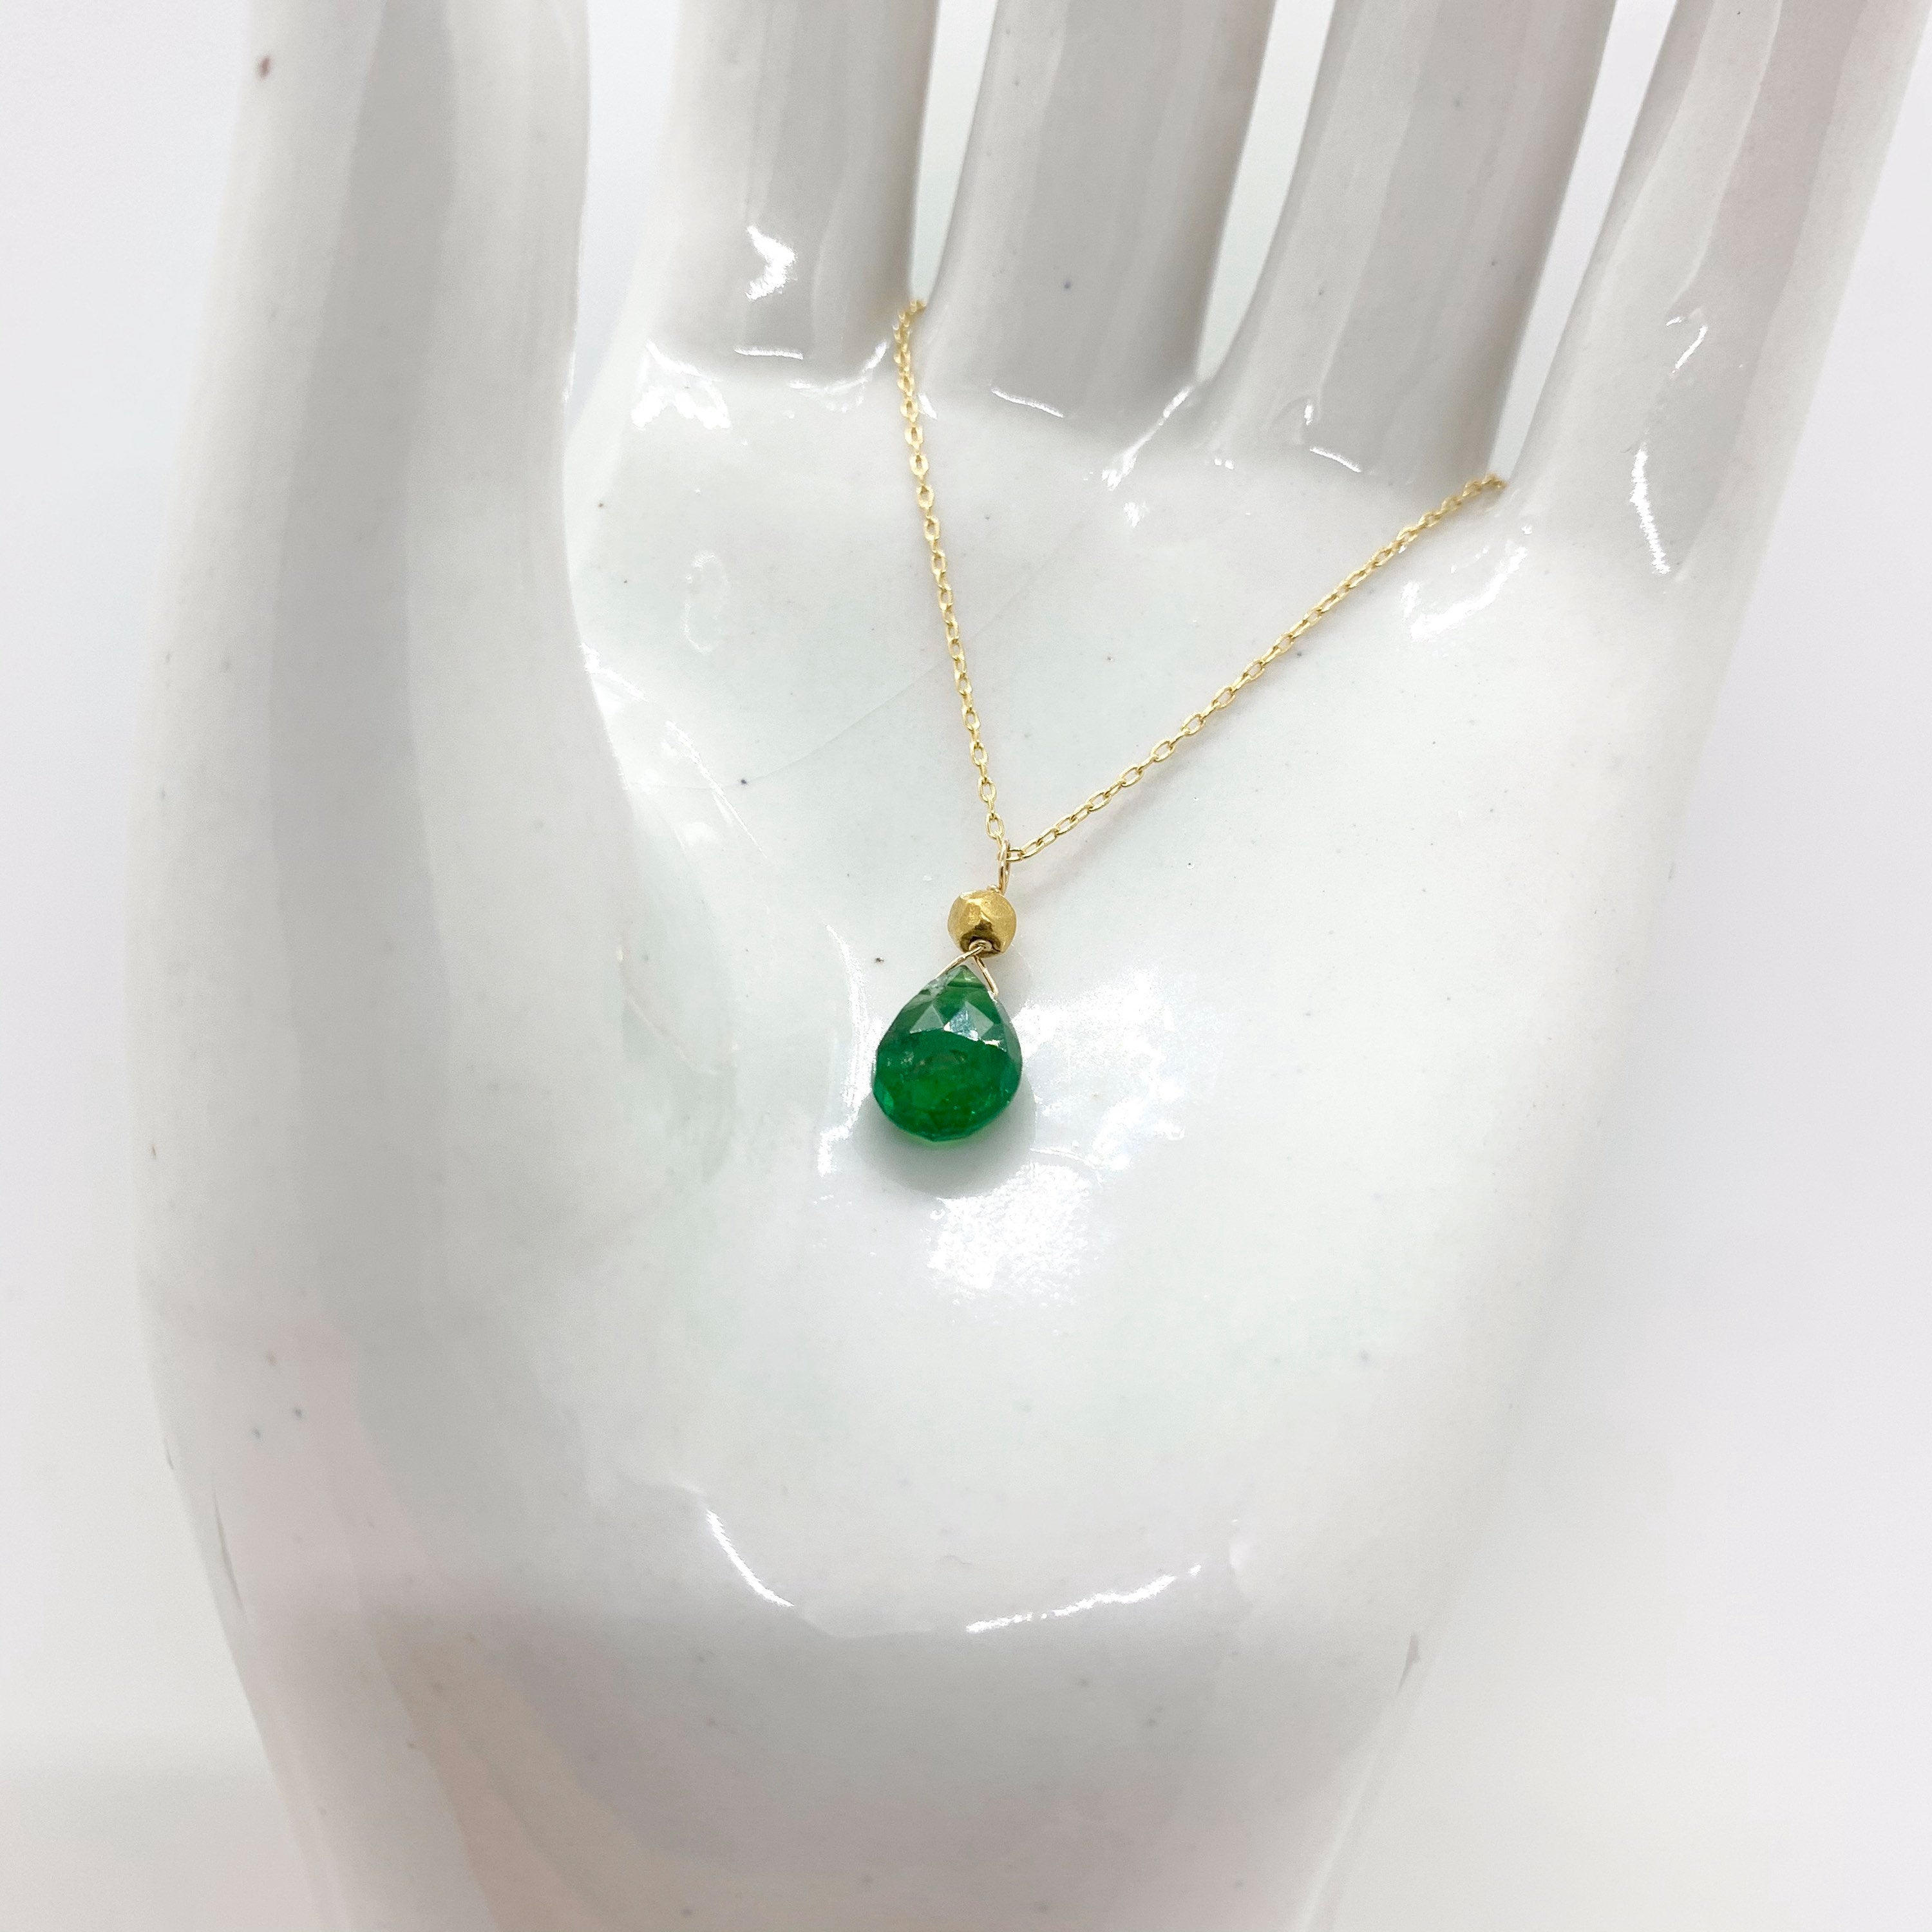 14k Gold Chain Necklace w/ Emerald Drop & 18k Gold Nugget